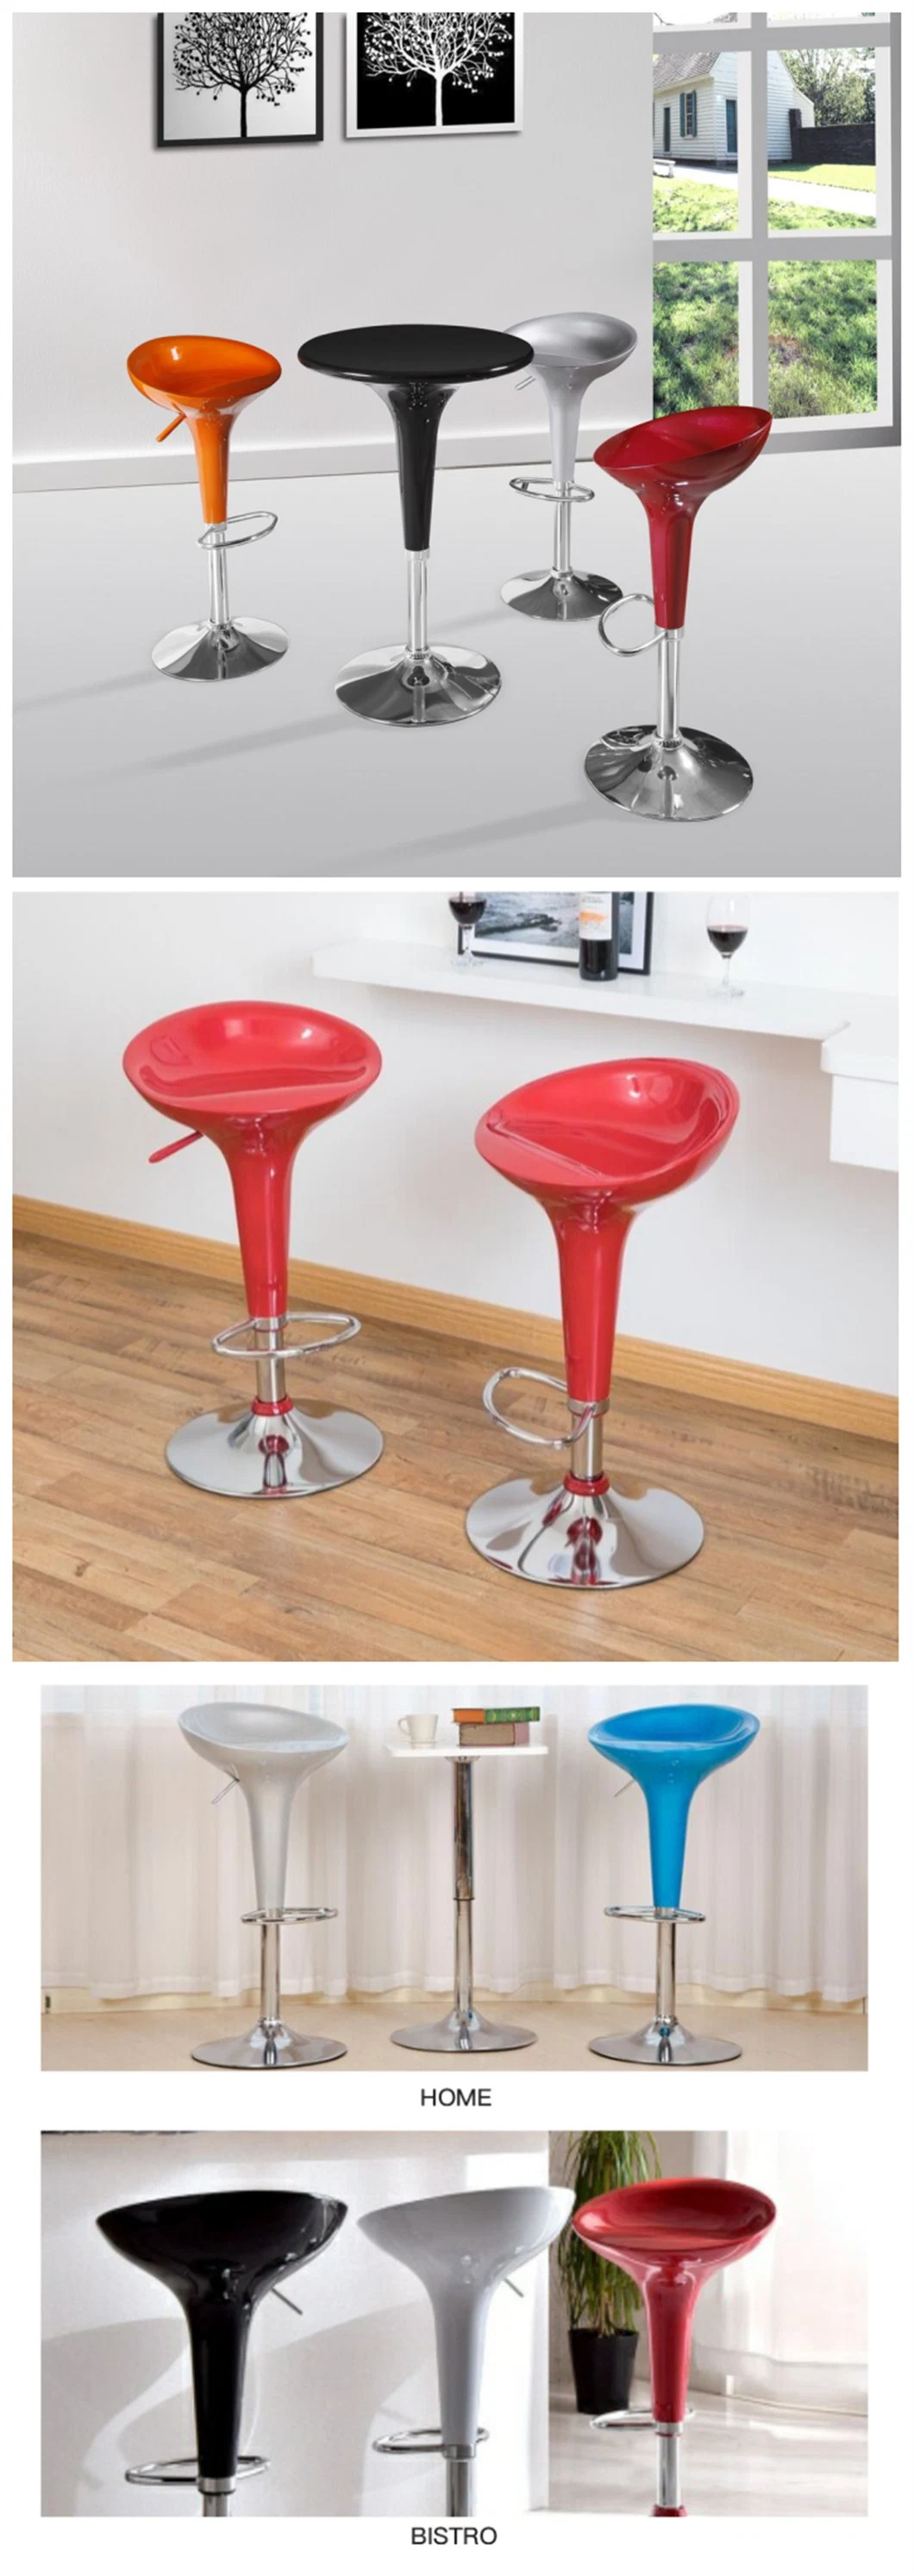 China Wholesale Modern Commercial Bar Furniture Swivel/Rotating/Lift ABS Barstools Price for Kitchen/Restaurant/Coffee Shop/Dining Room/Beauty Salon/Night Club